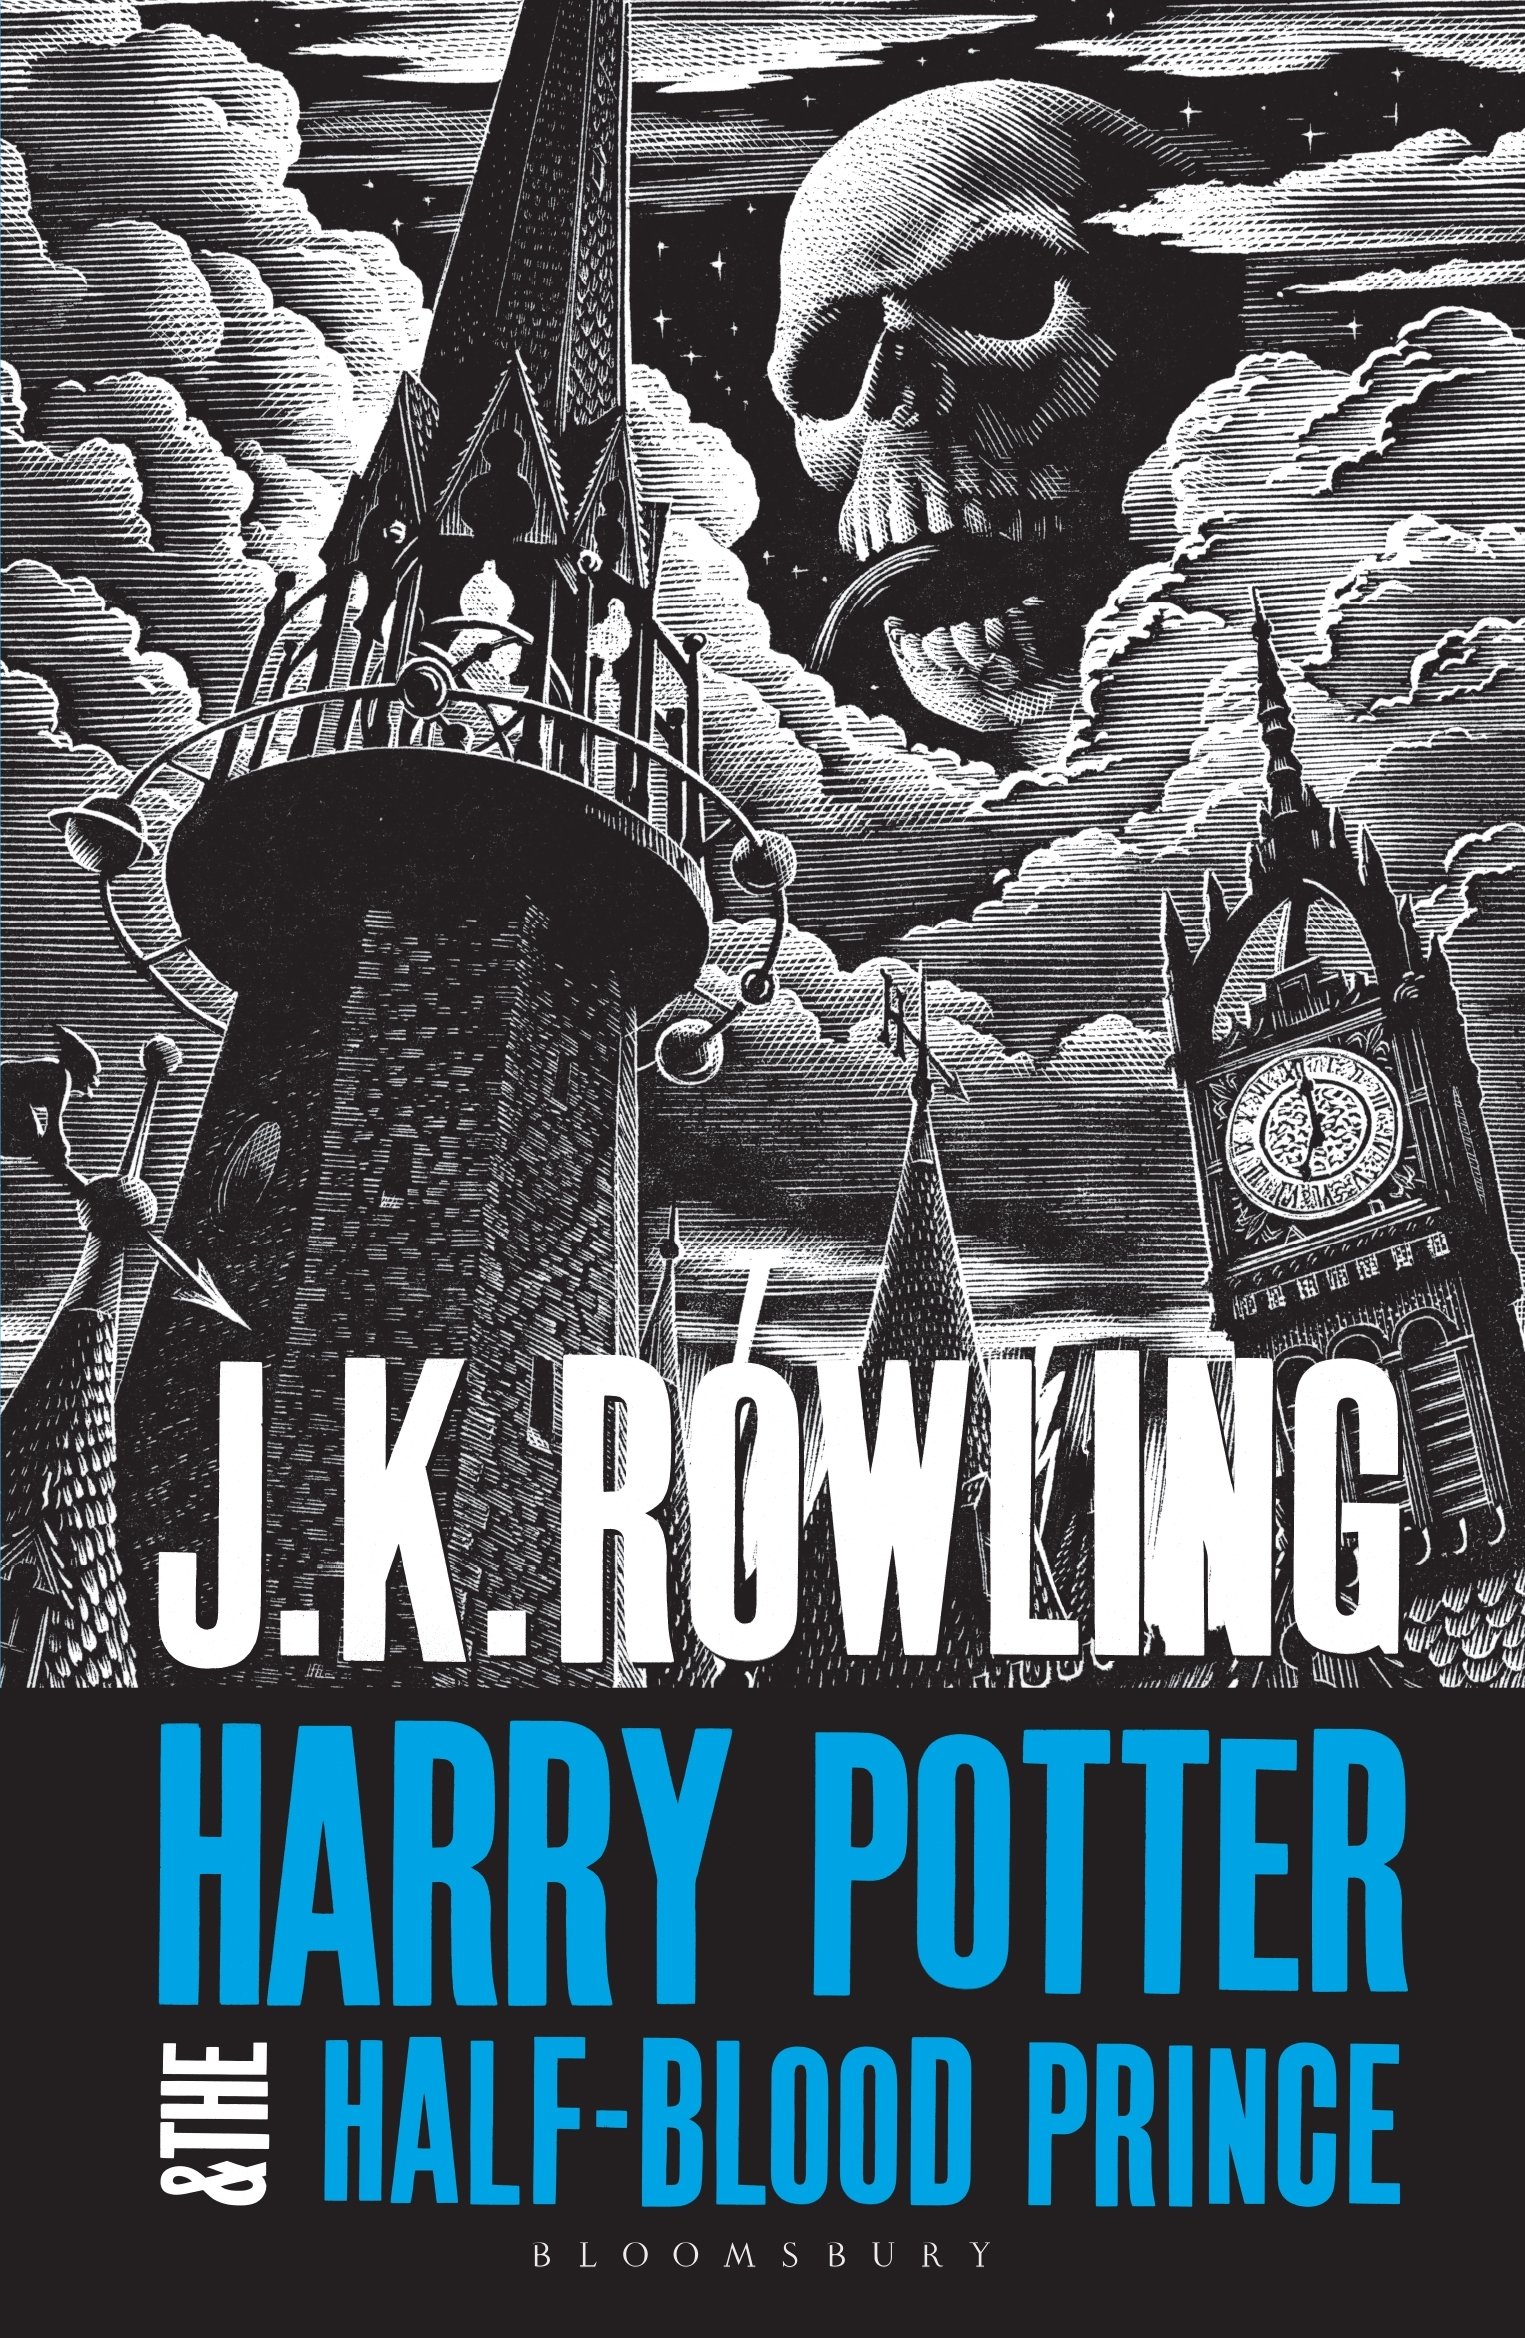 Harry Potter and the Half-Blood Prince | J.K. Rowling